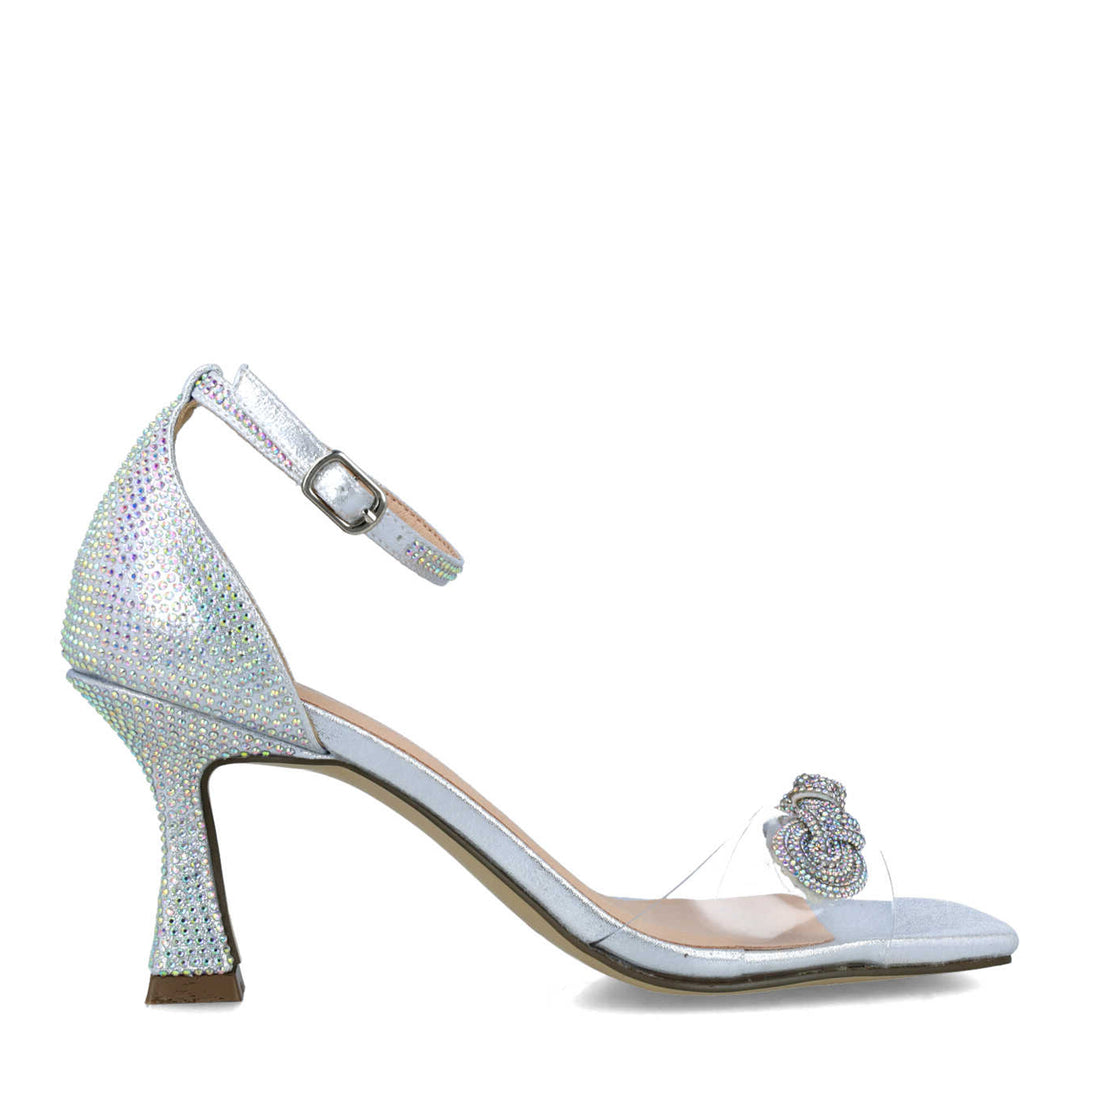 Silver Ankle-Strap High-Heel Sandals With Bow